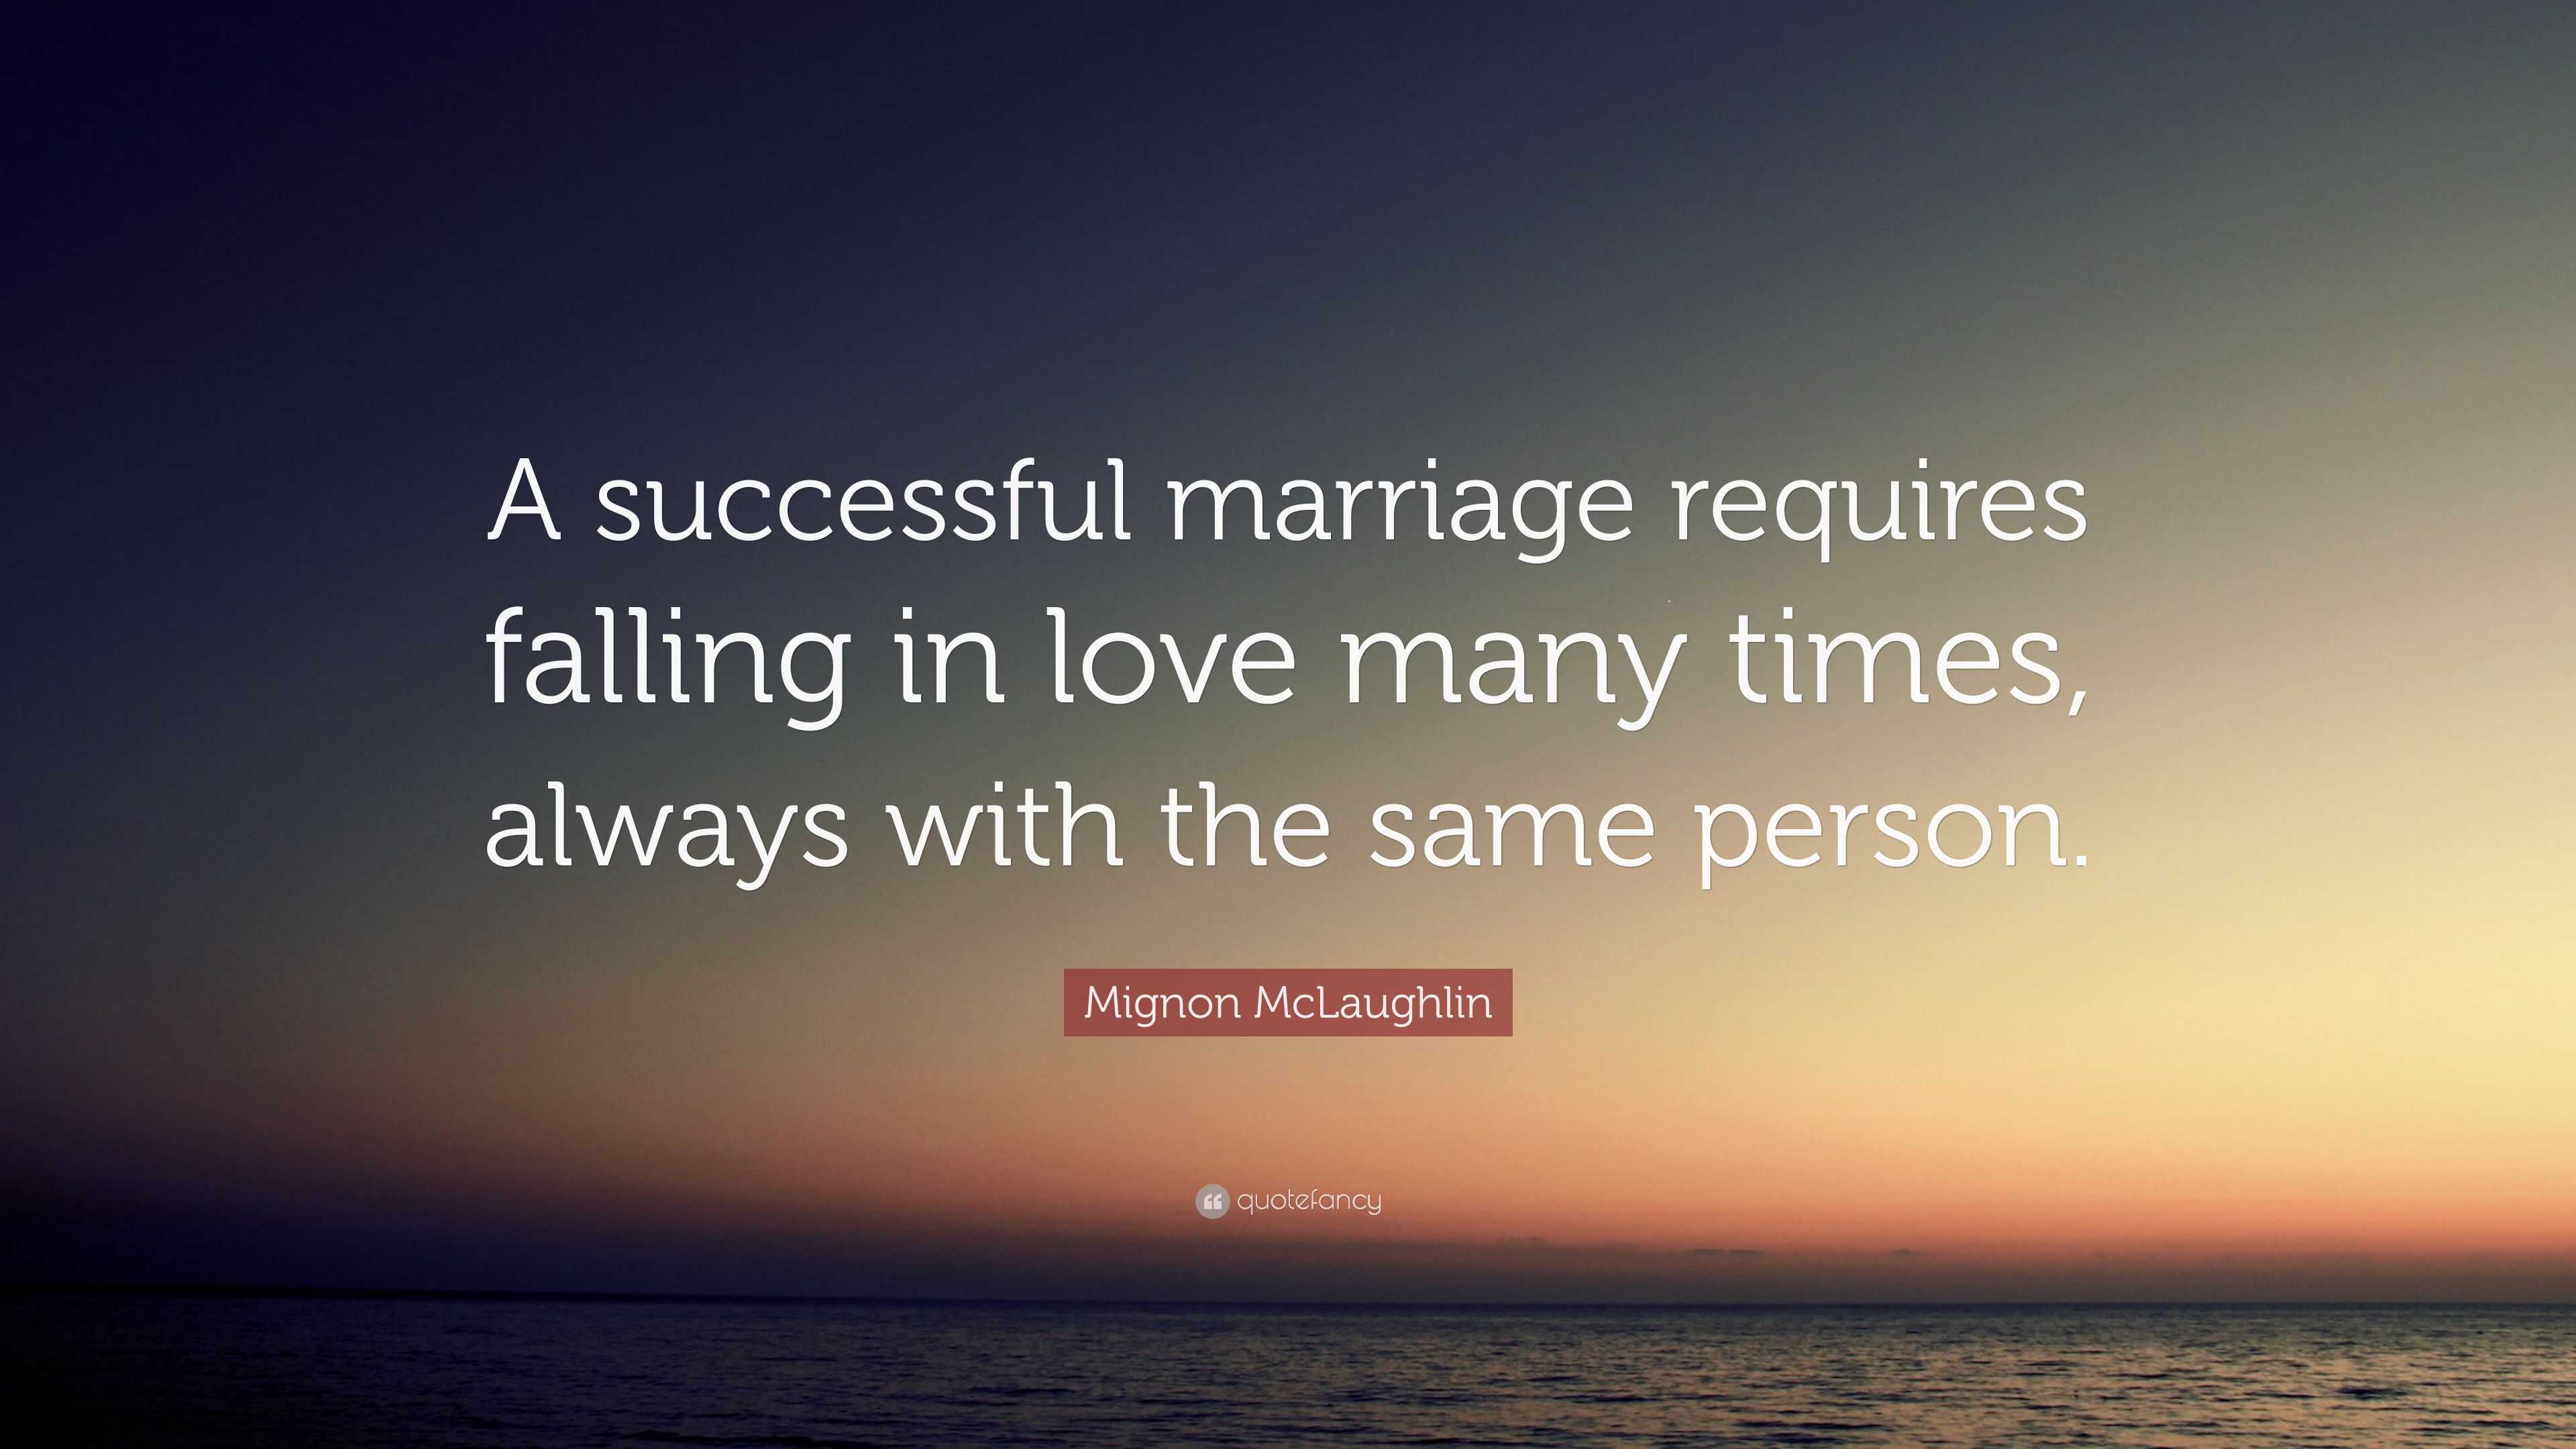 Mignon McLaughlin Quote: “A successful marriage requires falling in